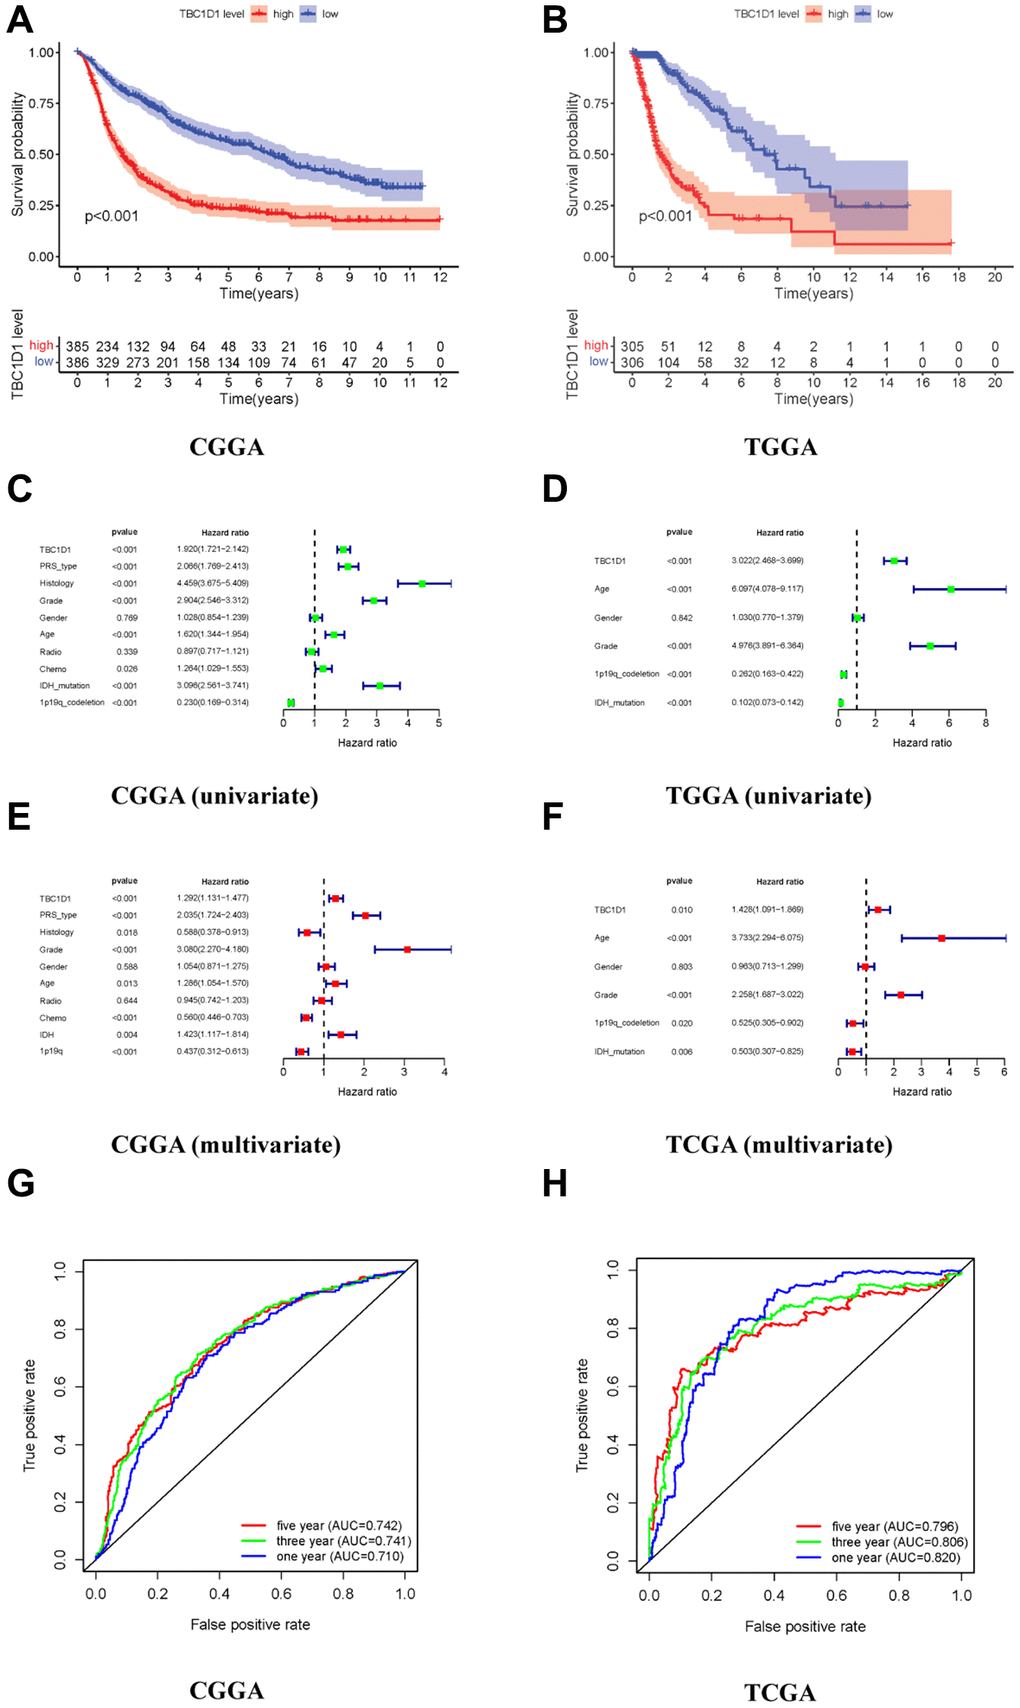 High expression of TBC1D1 in gliomas leads to poor prognosis. (A, B) Relationship between TBC1D1 expression and prognosis in CGGA and TCGA databases. (C, D) Multivariate analysis in CGGA and TCGA databases. (E, F) Multivariate analysis in CGGA and TCGA databases. (G, H) ROC curves in CGGA and TCGA databases, diagnostic value of TBC1D1 expression in gliomas.